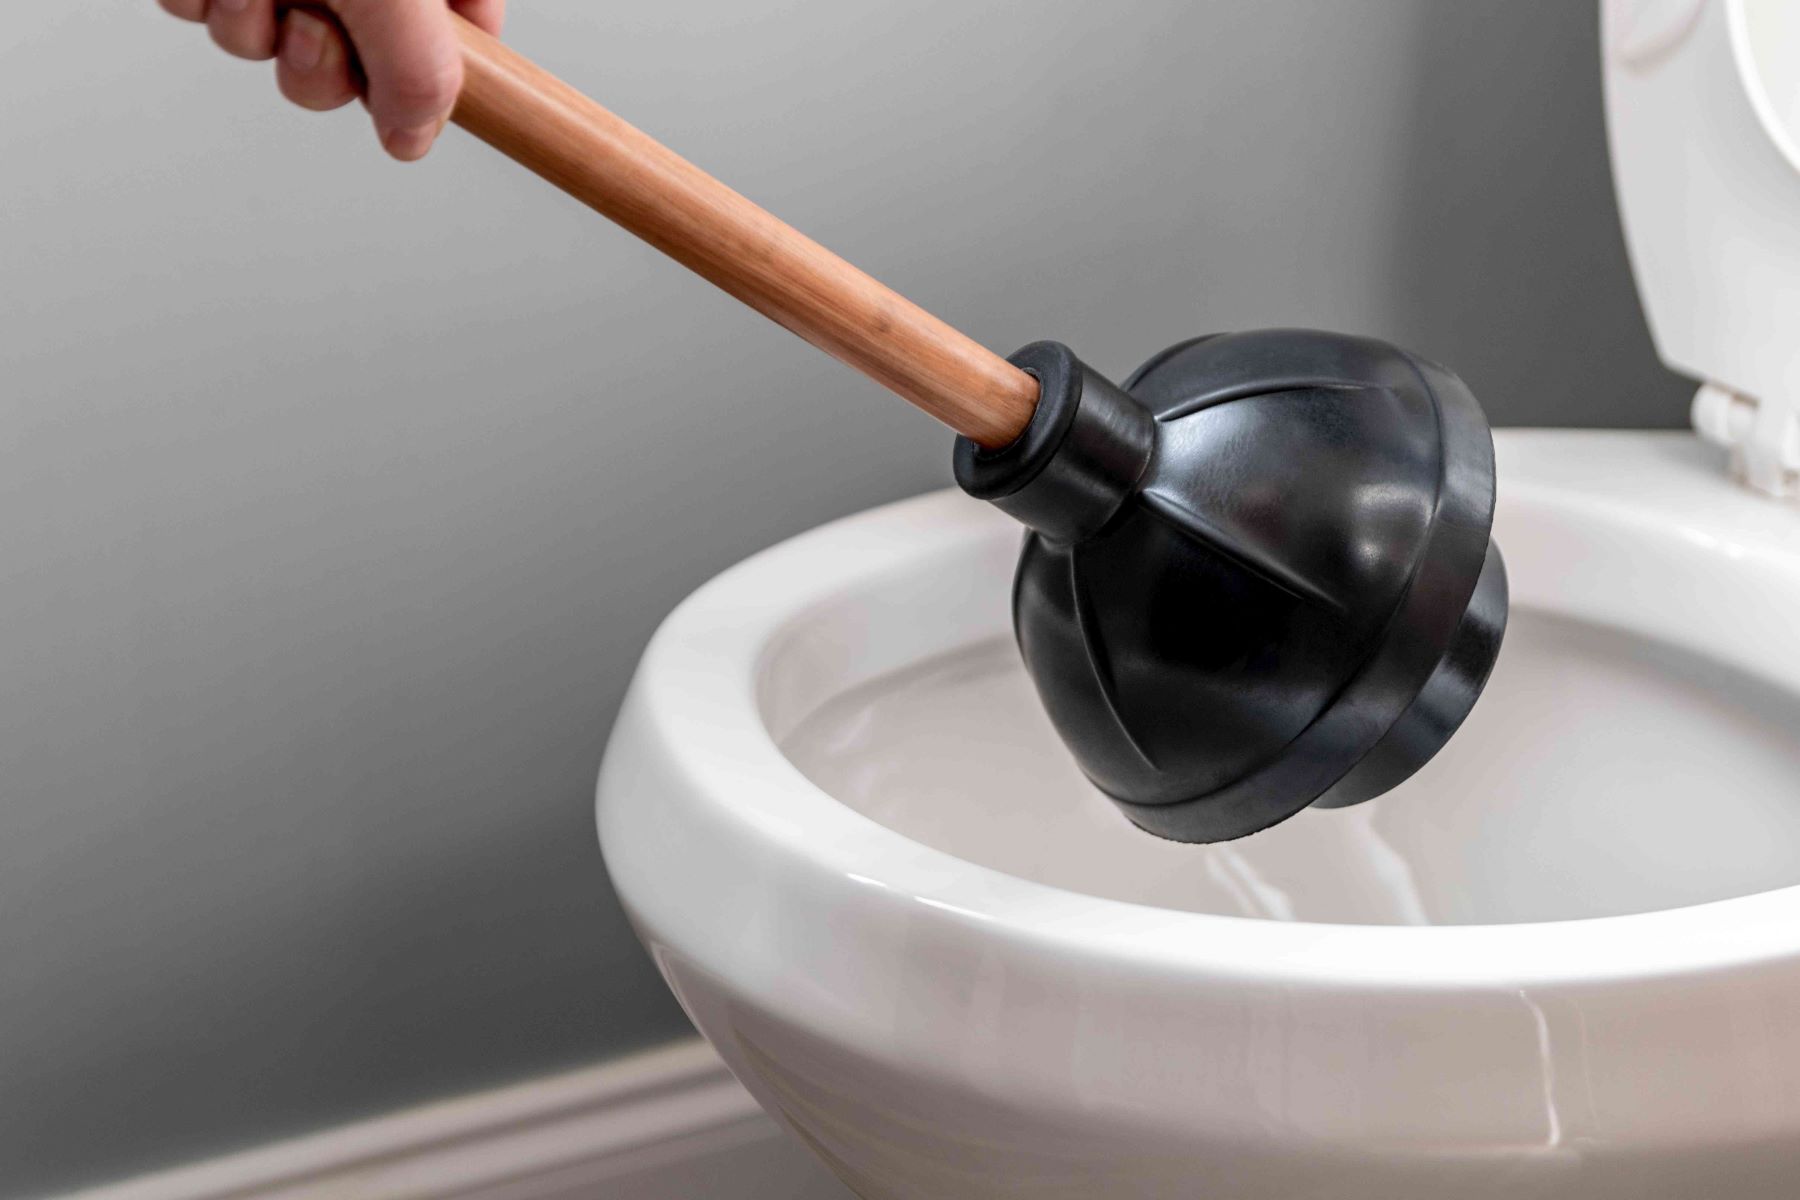 Unbelievable! This Surprising Tool Can Unclog Your Toilet!